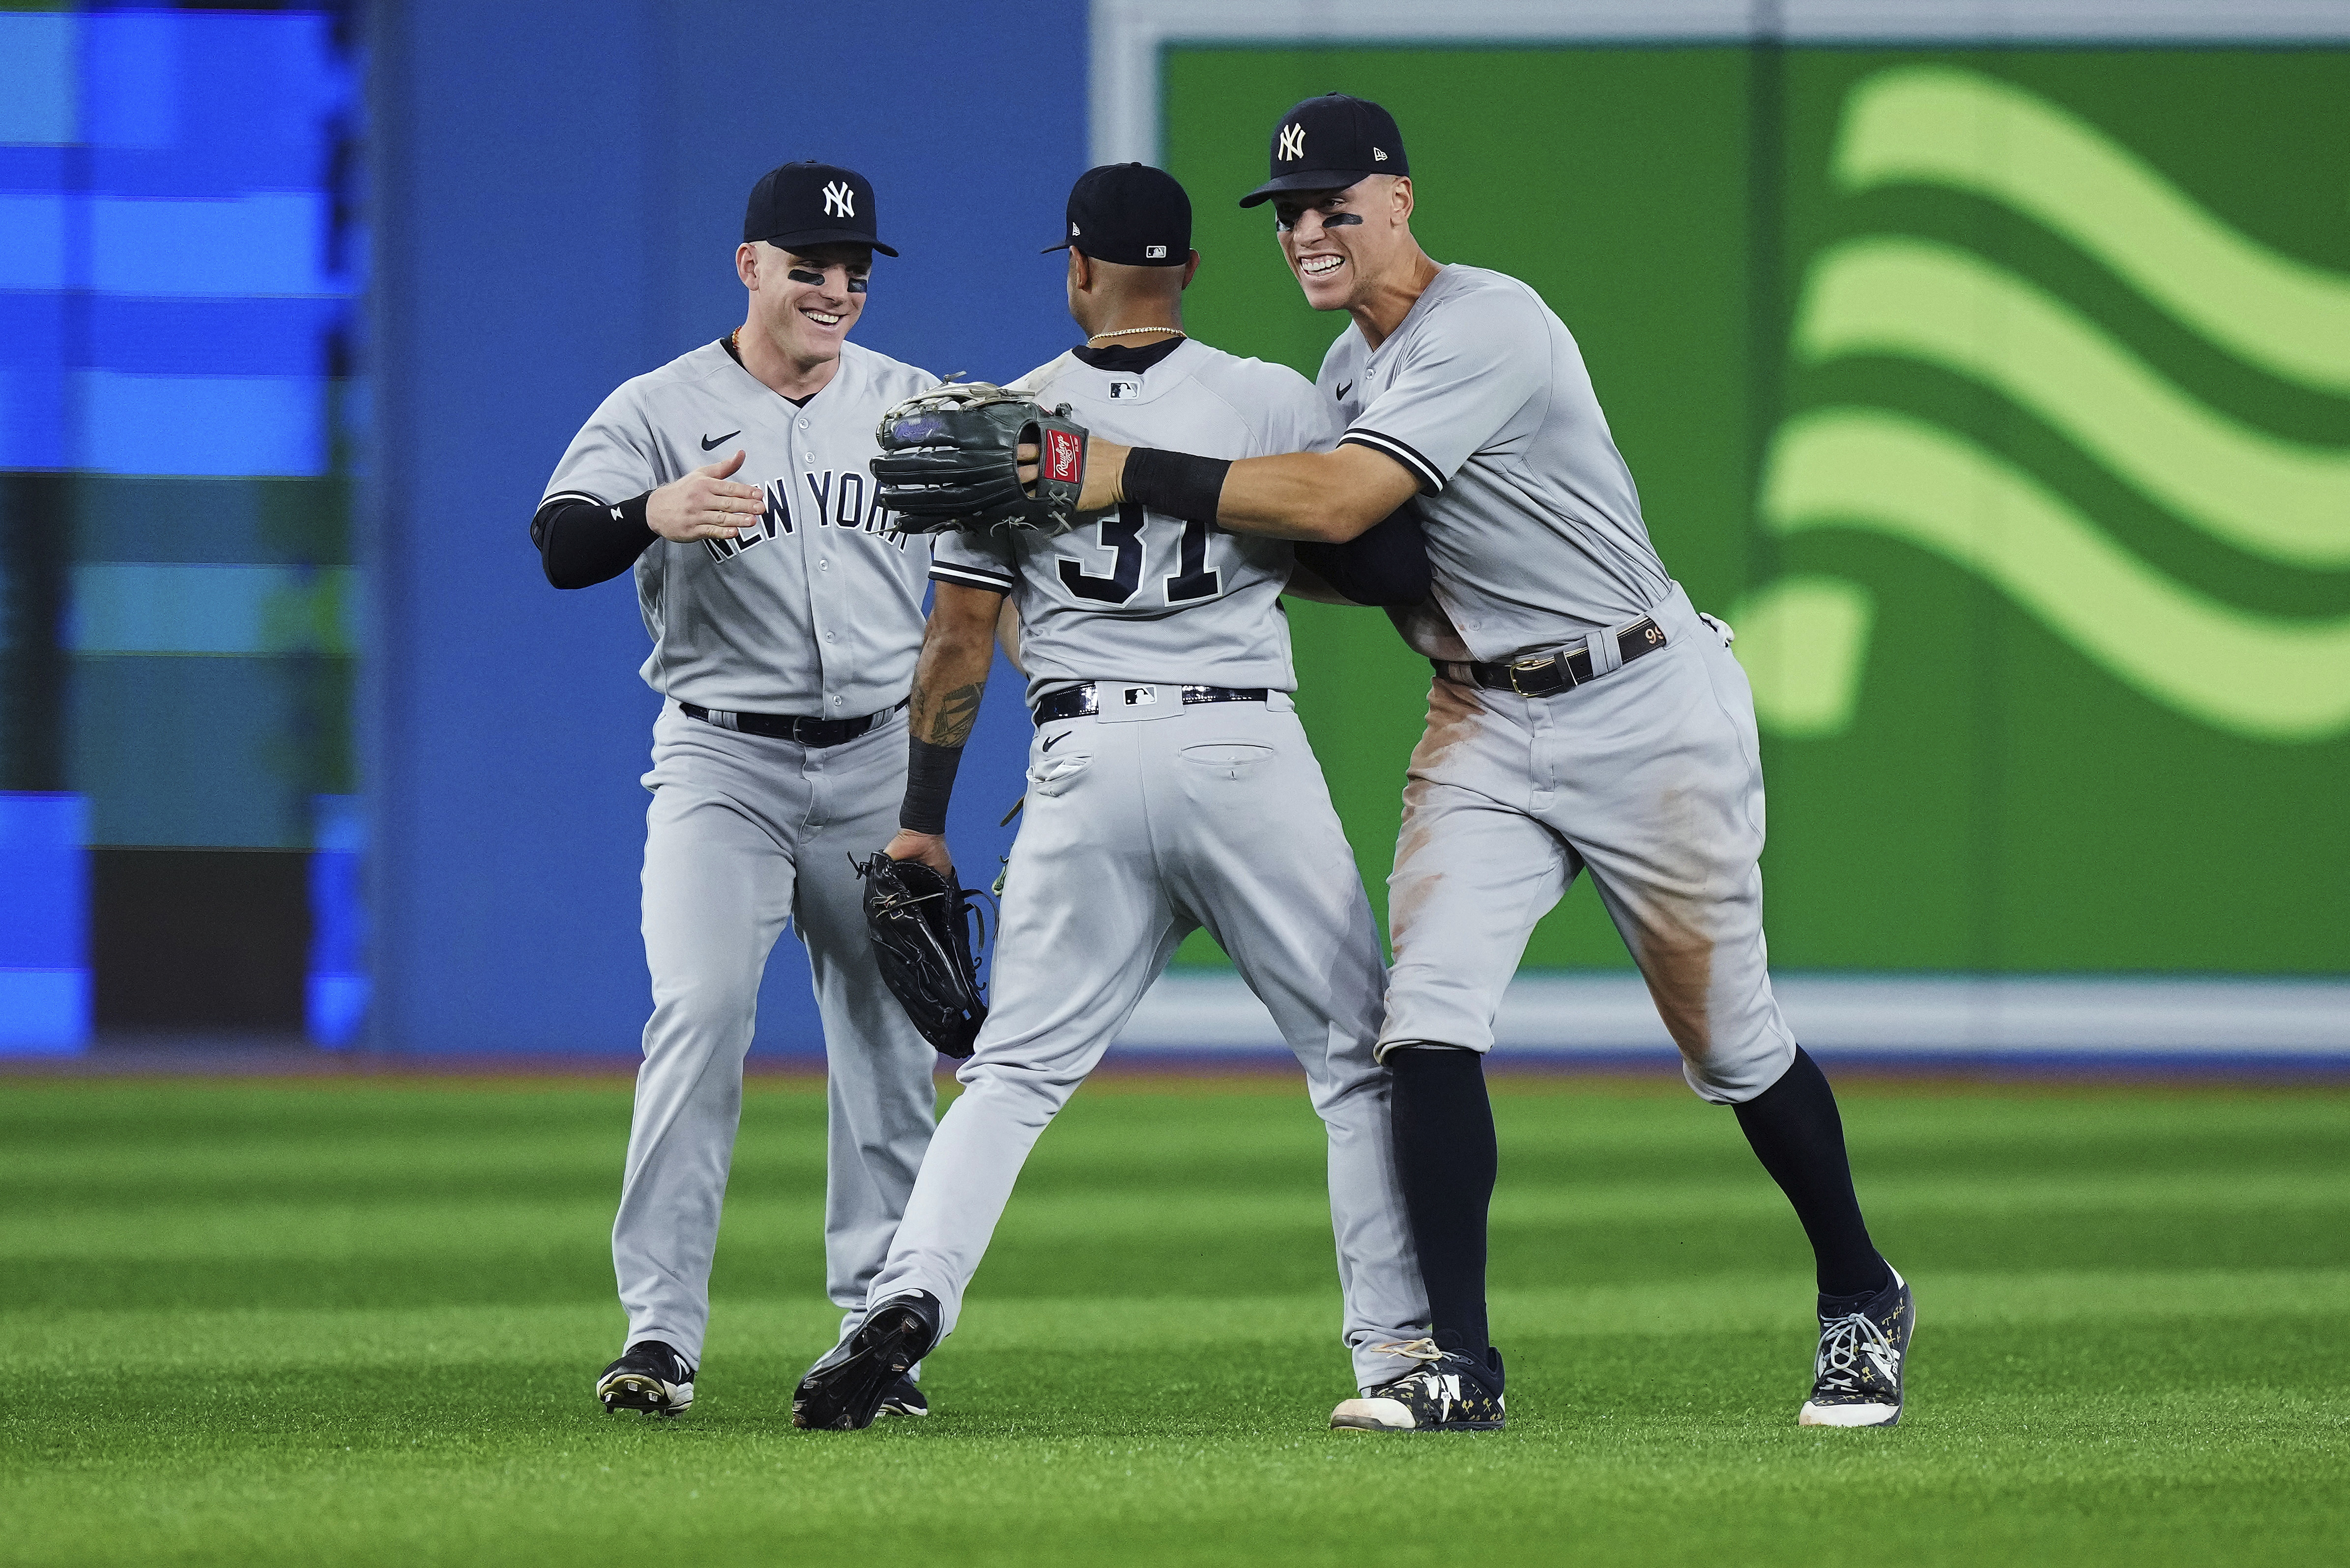 Yankees lose to Rays again, 2-1, despite Aaron Judge's 52nd homer